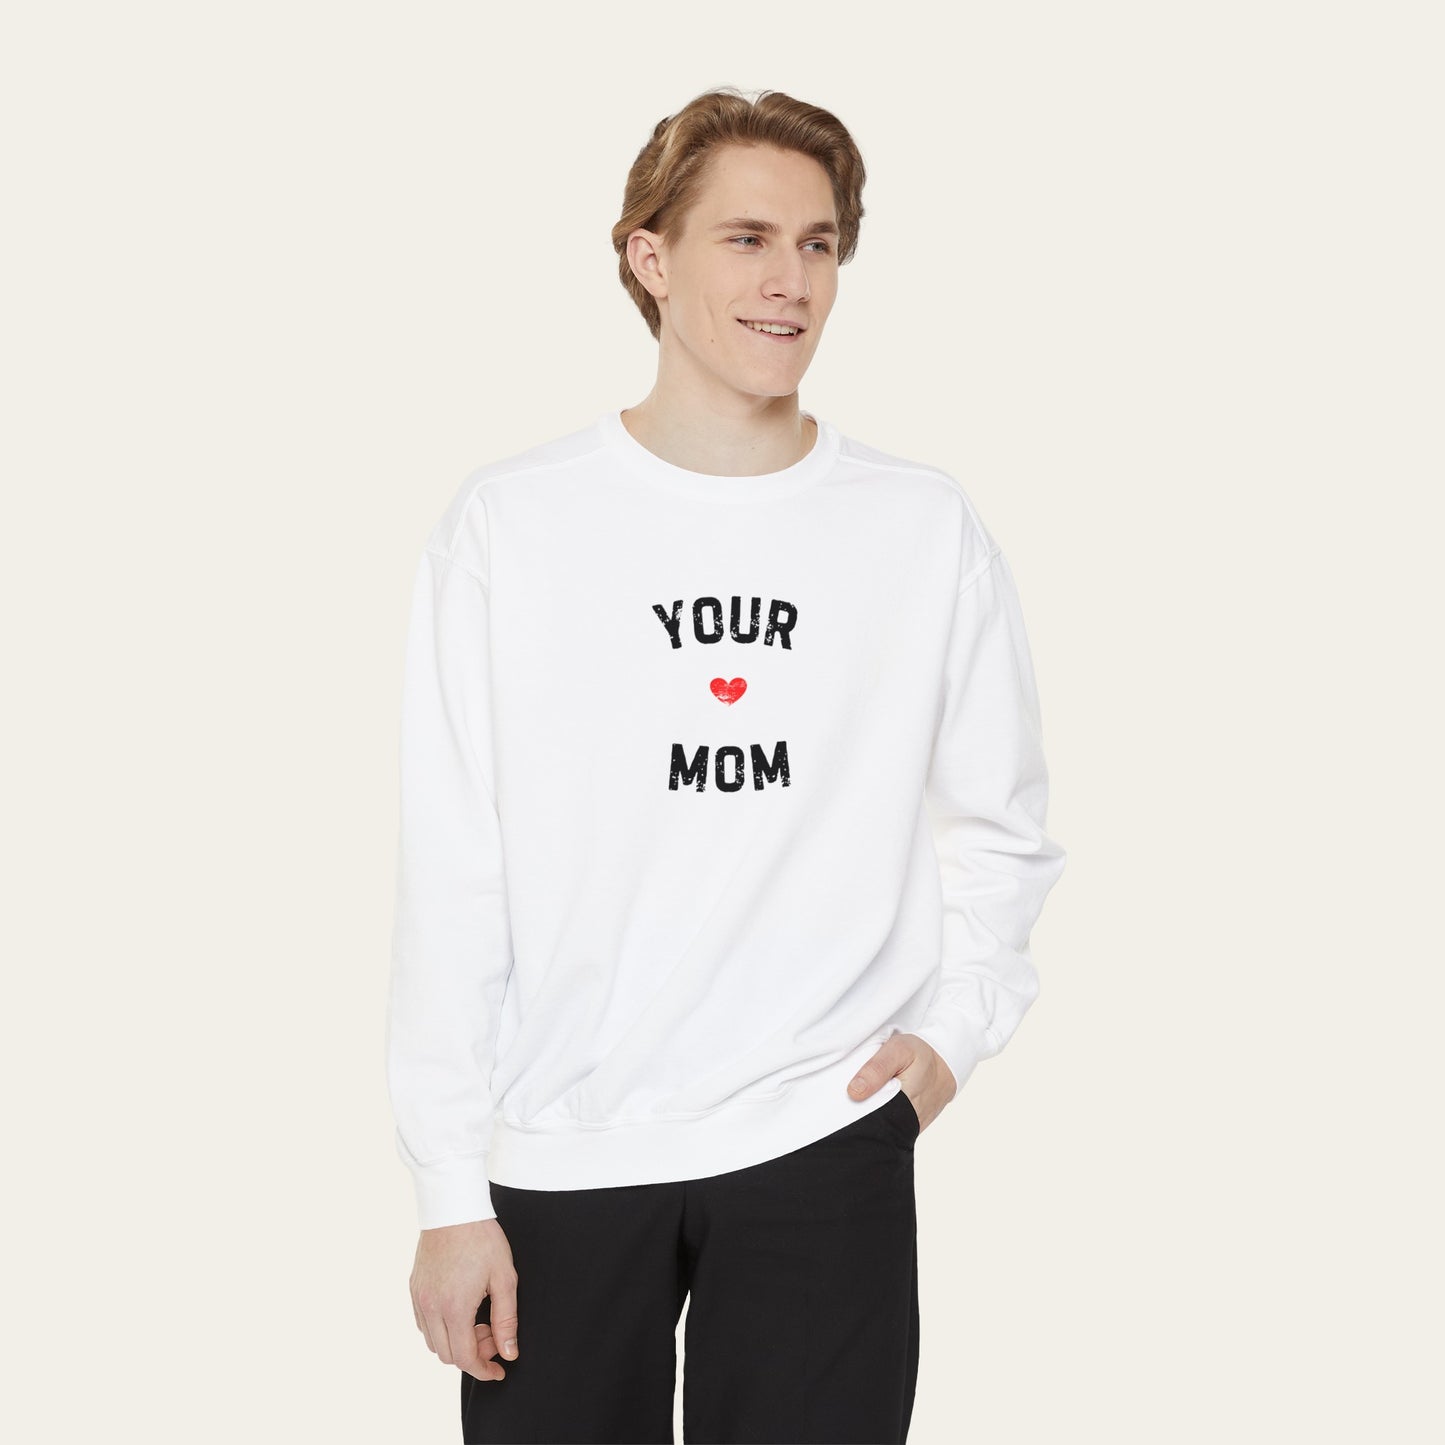 Your Mom Shirt Mama Shirt Mother's Day Gift For Mom Of The Year Shirt For New Mom Gift For New Mom Sweatshirt For Mom Birthday Gift For Her